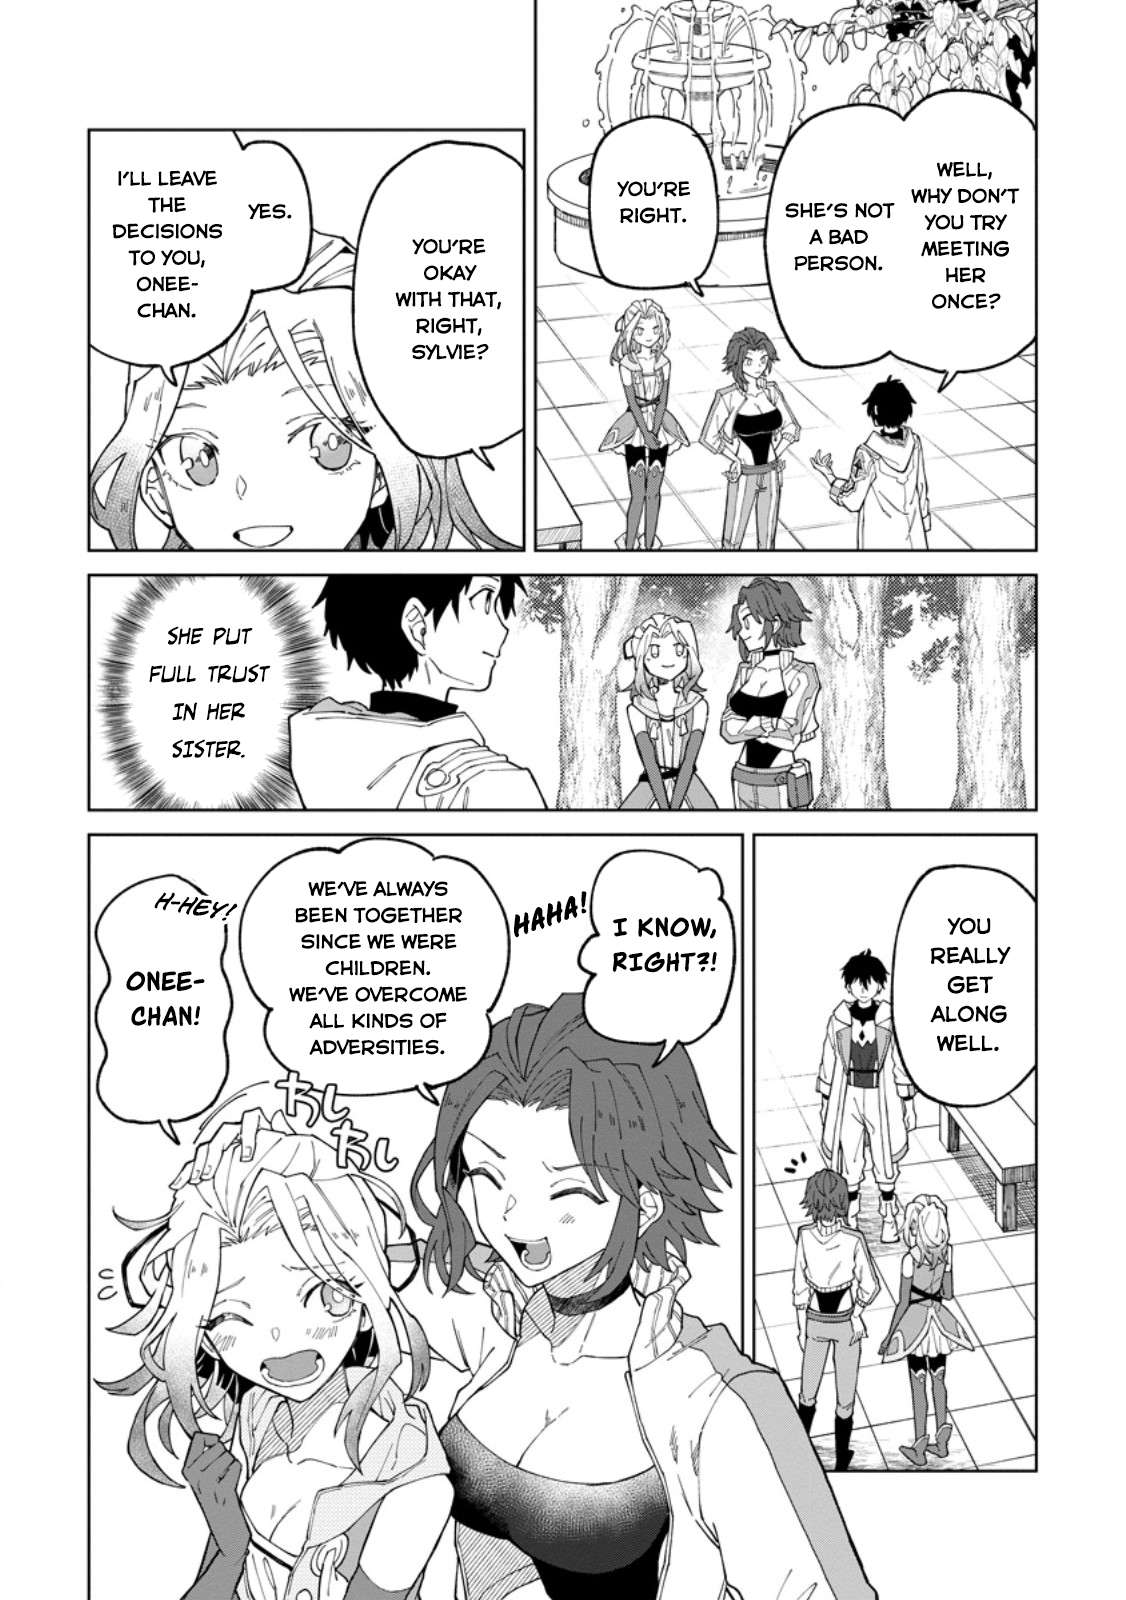 The White Mage Who Was Banished From the Hero's Party - chapter 30.2 - #3